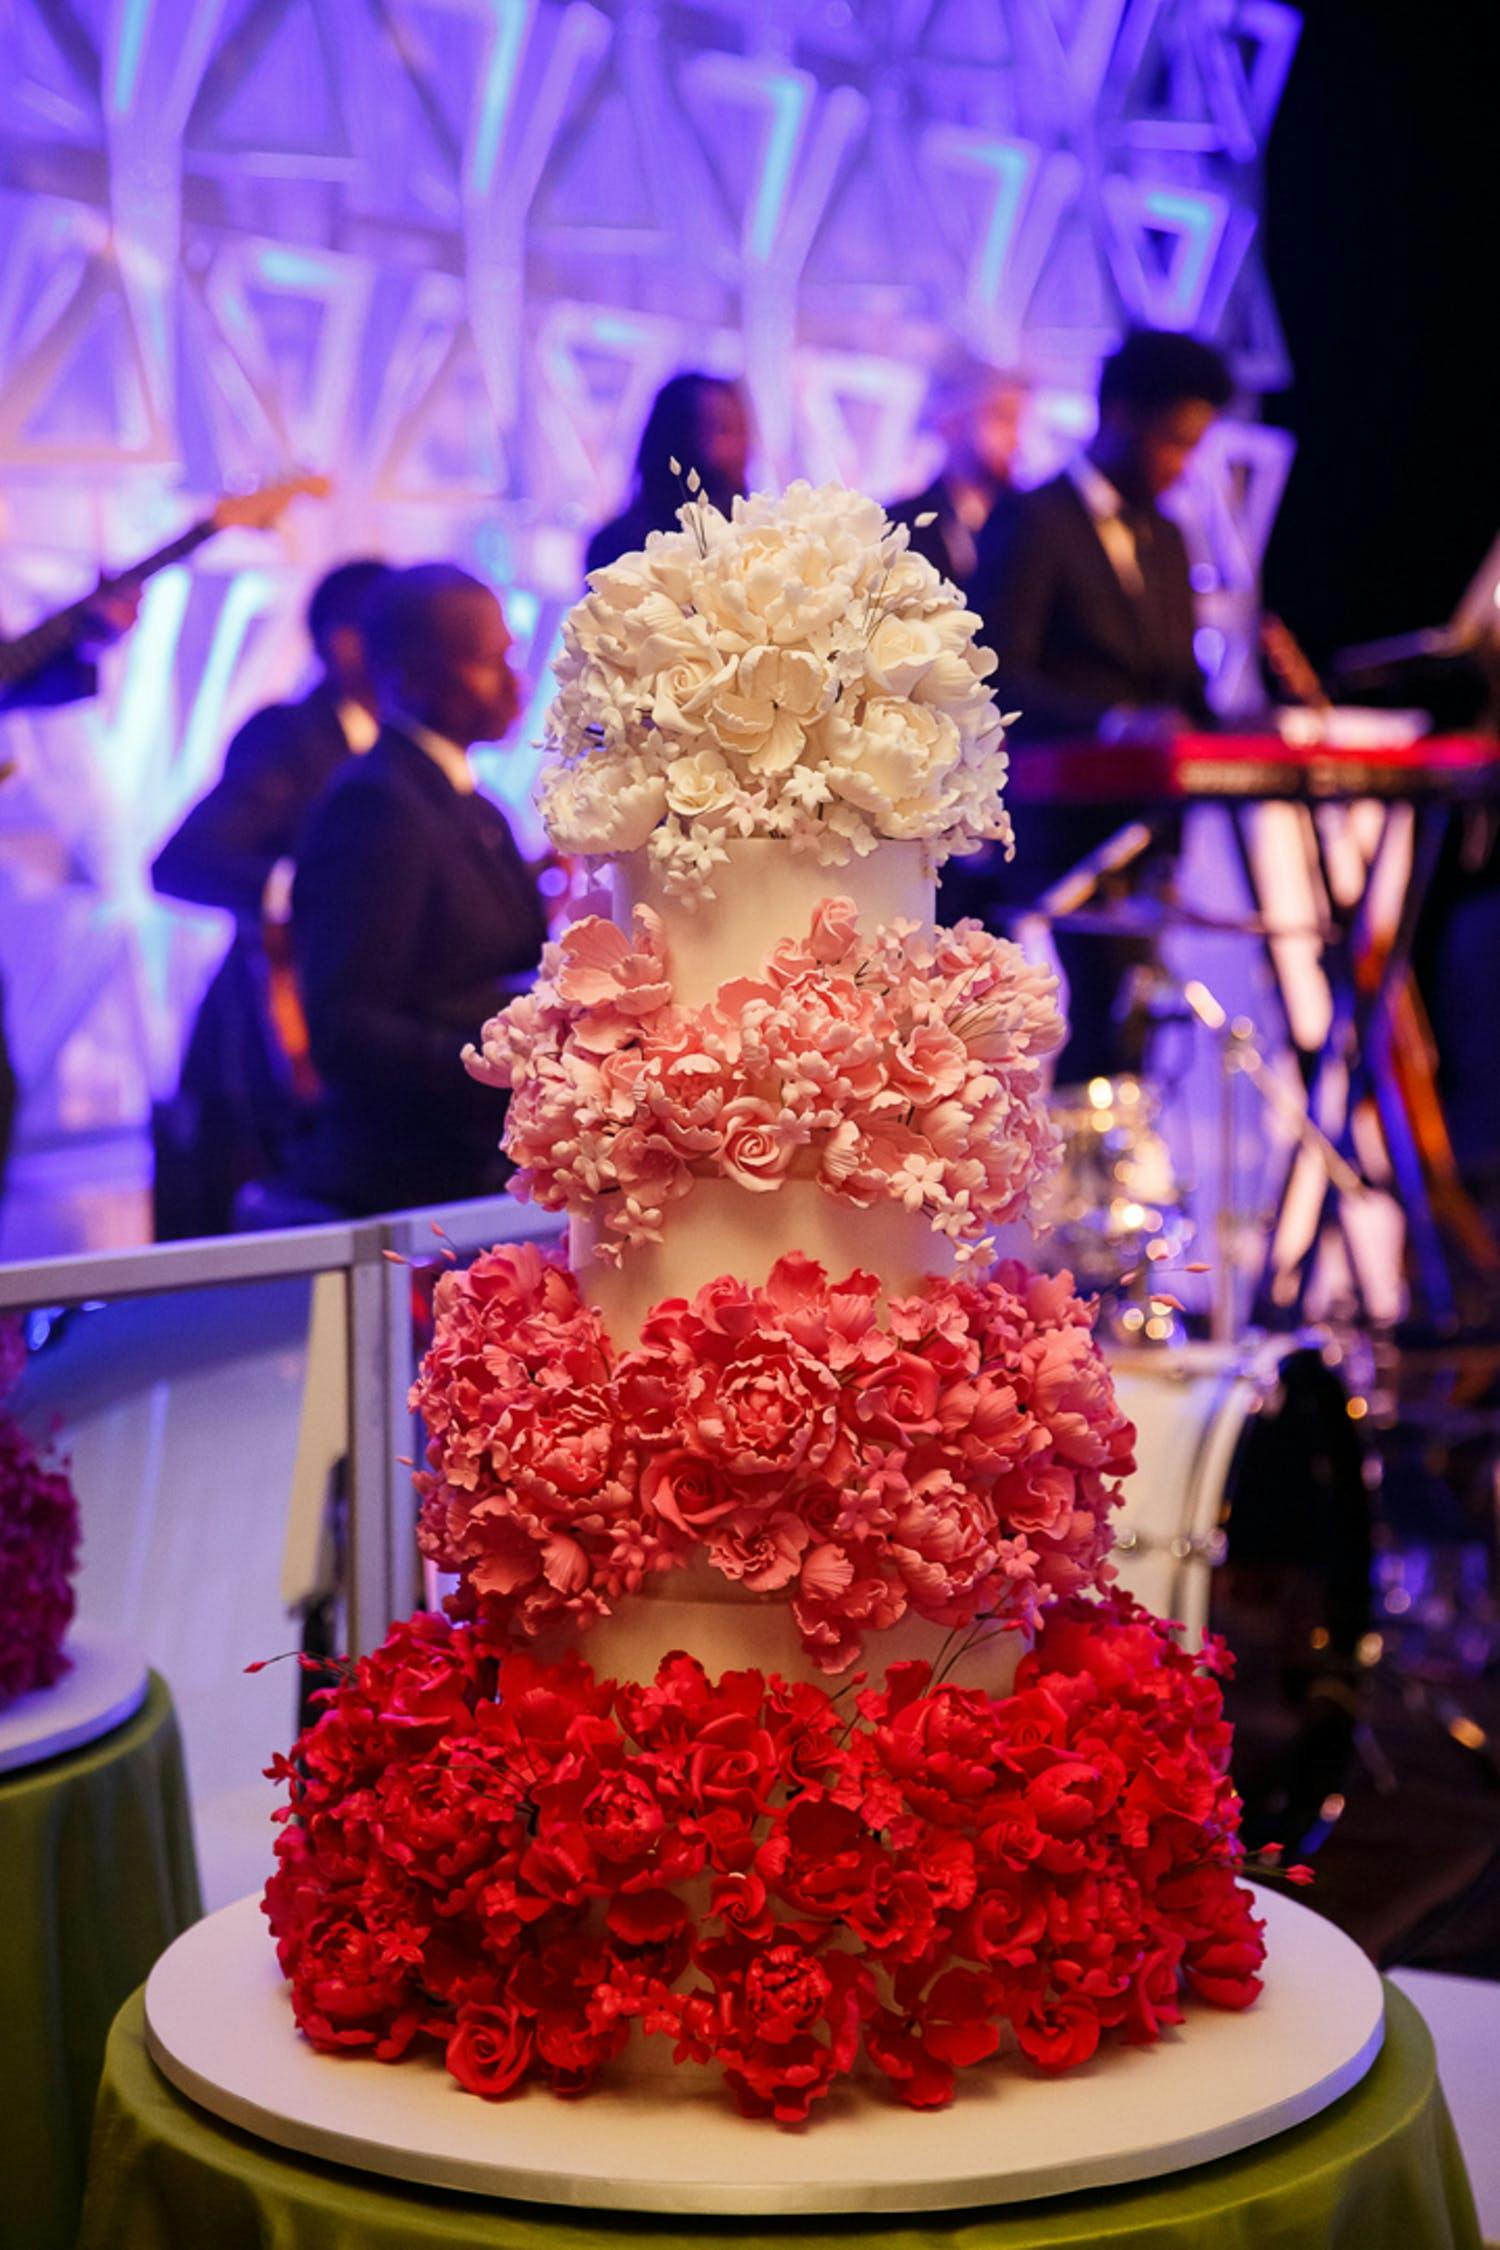 Four-tier cake covered with ombré tiers of flowers going from red to dark pink to pink to white | PartySlate